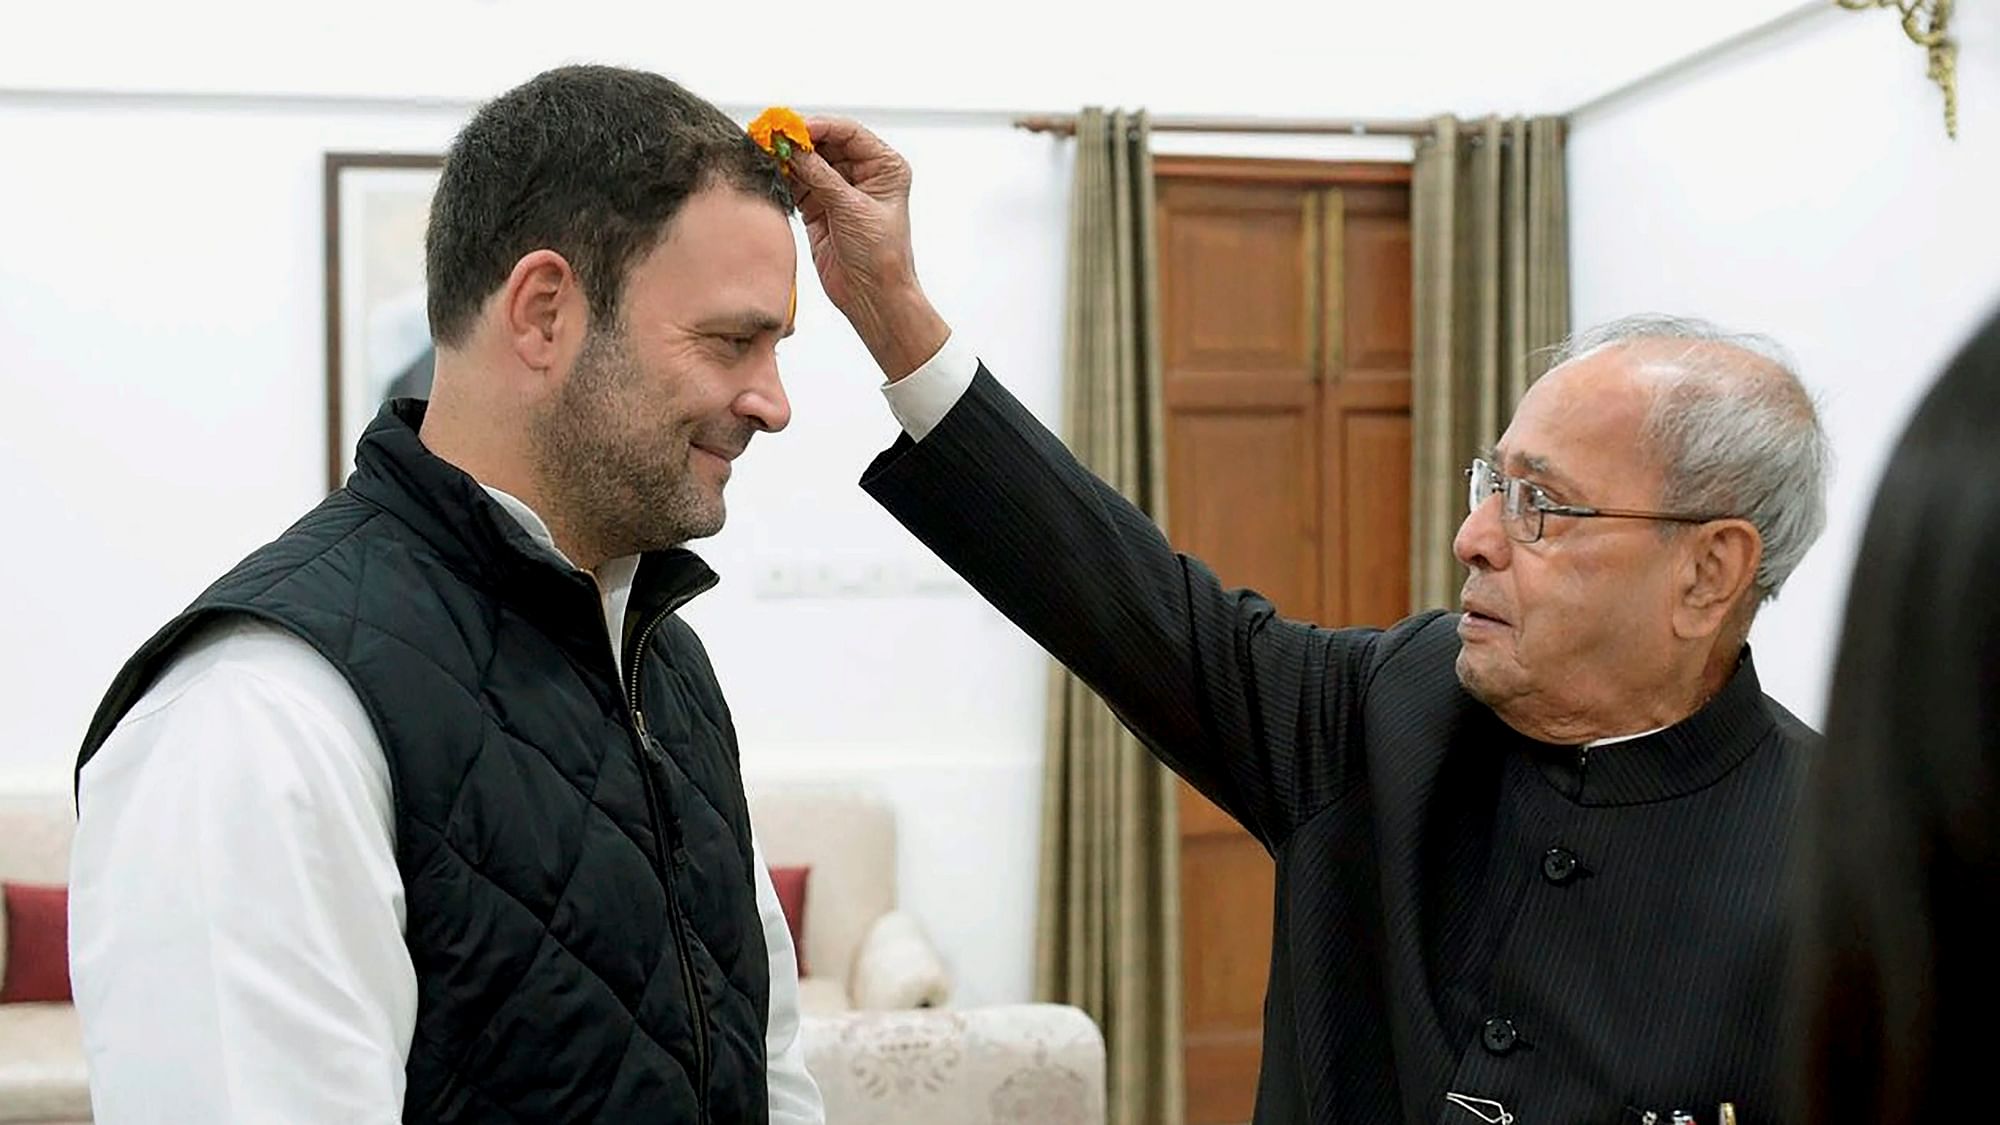 File image of Rahul Gandhi being greeted by former president Pranab Mukherjee before he filed his nomination papers for party president’s post, in New Delhi.